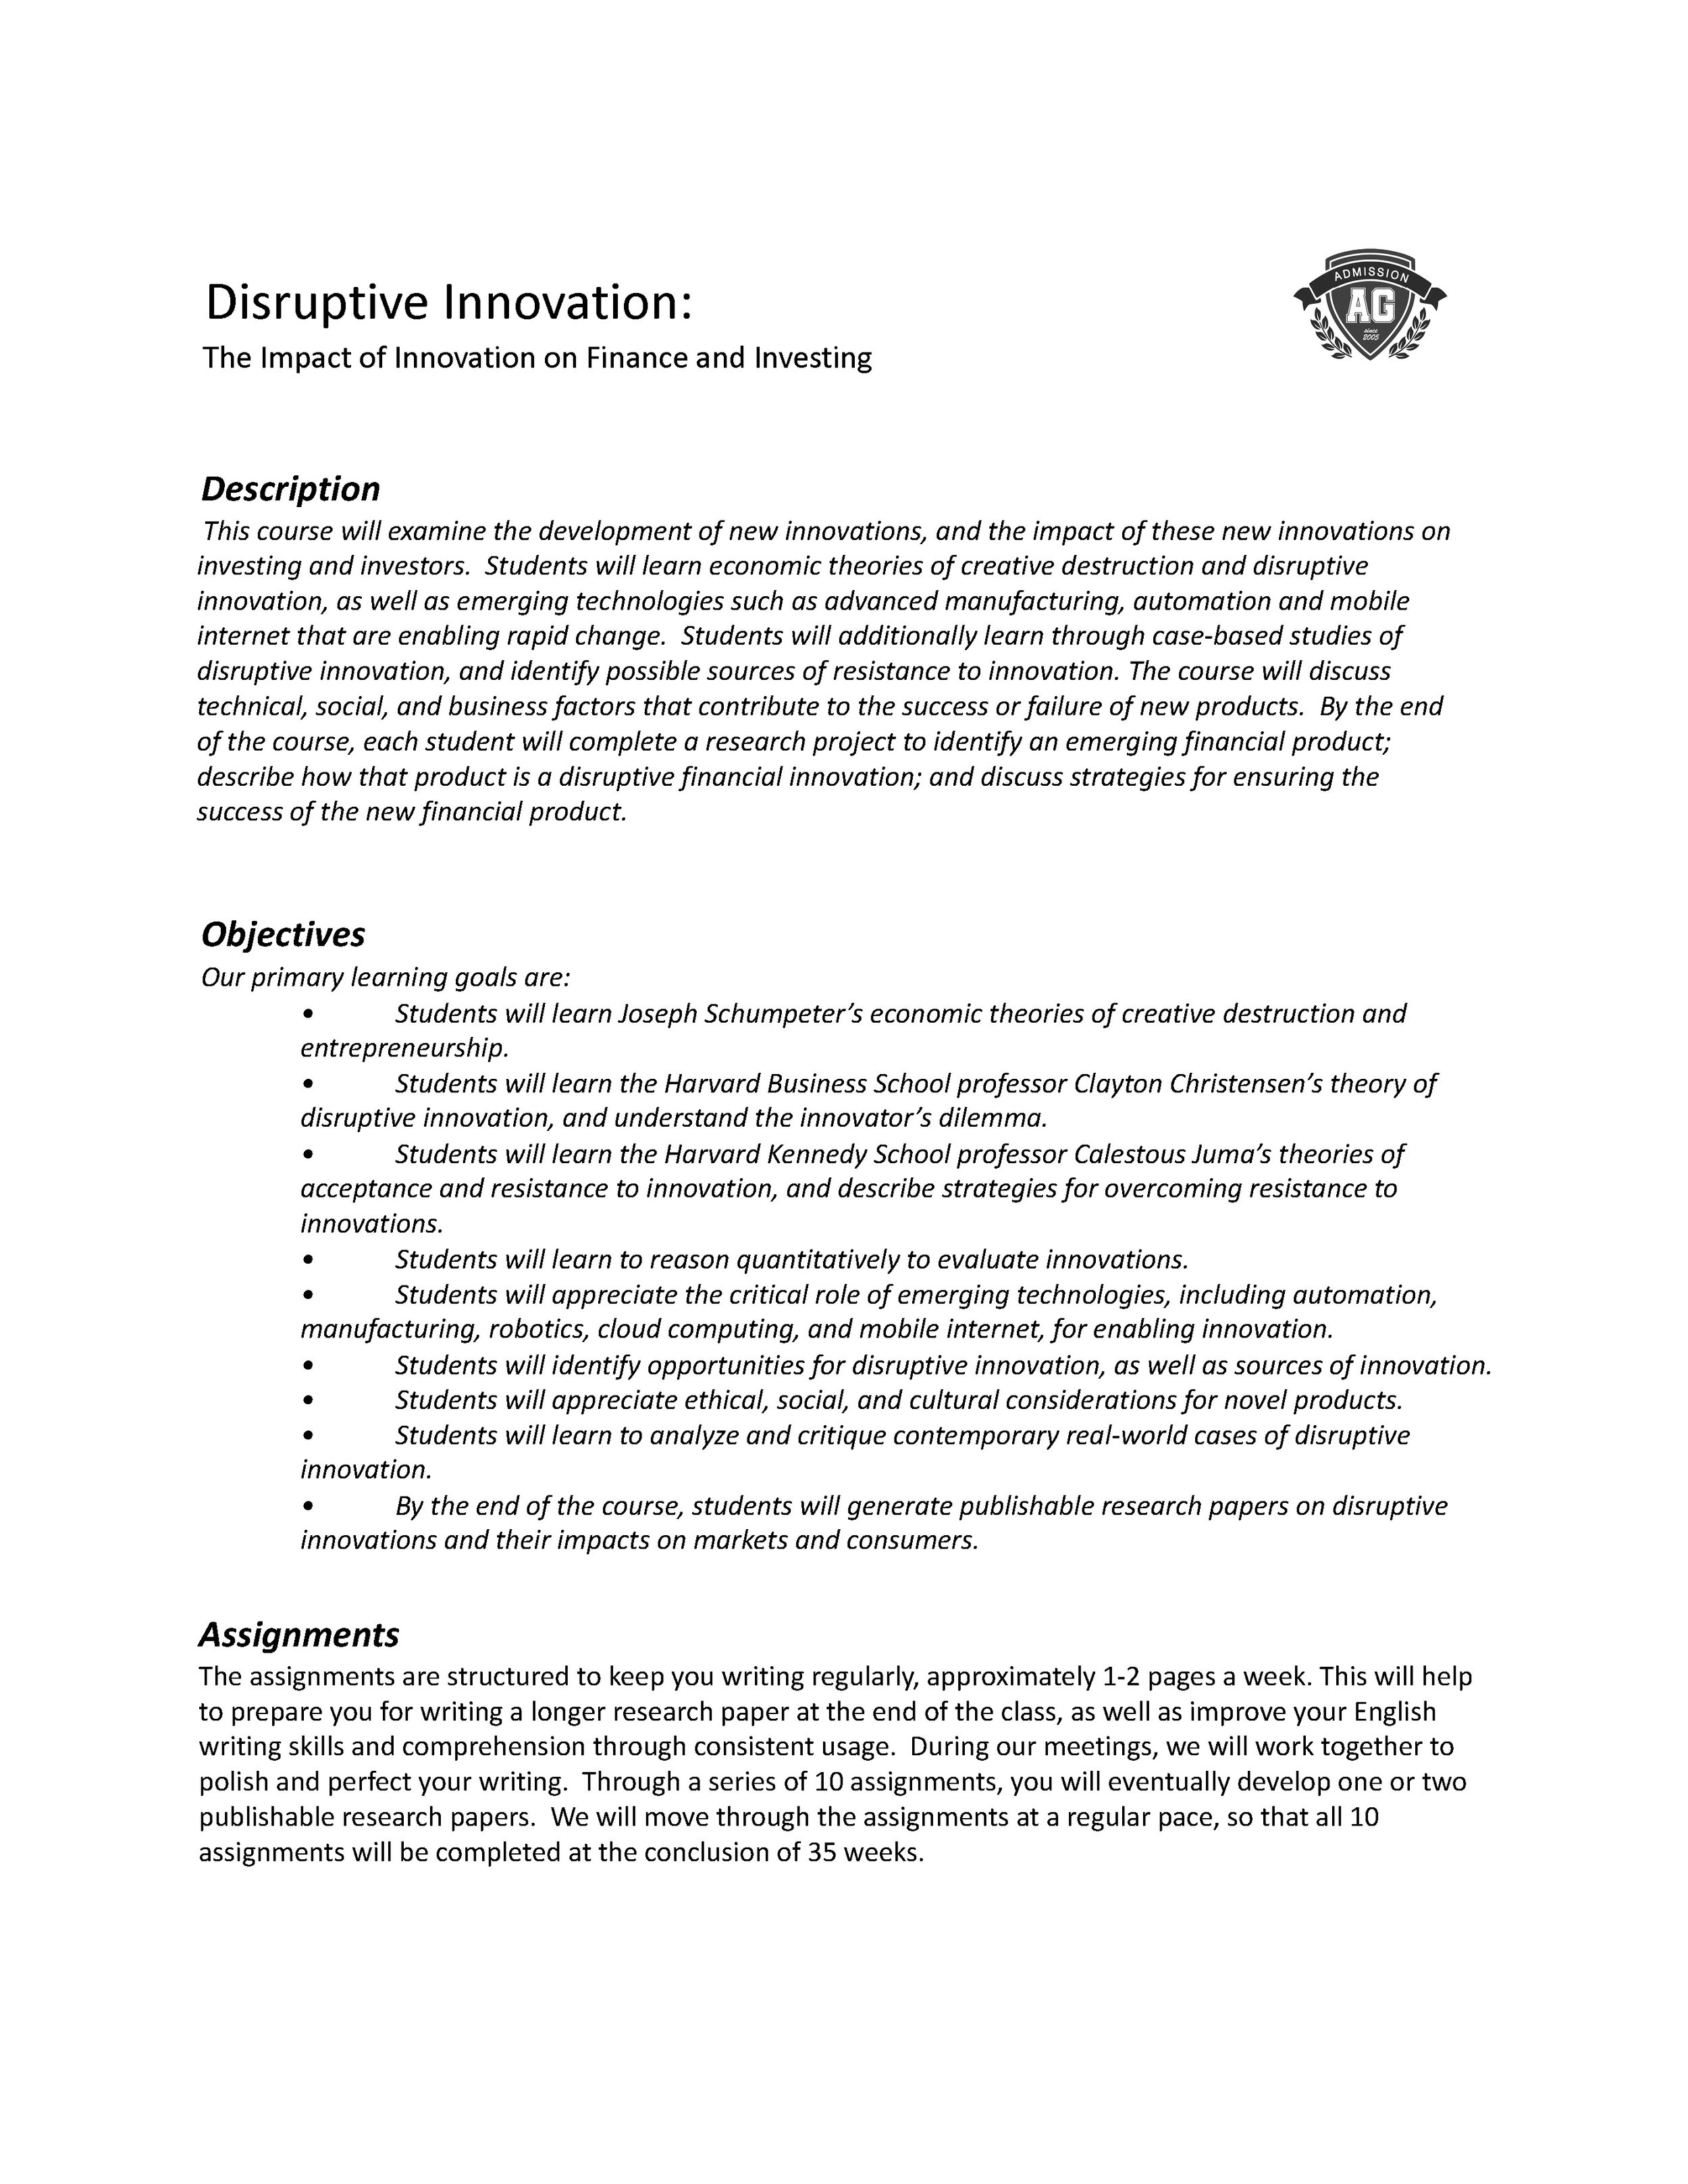 Disruptive Innovation in Finance and Investing_Jasper[34]_Page_1.jpg